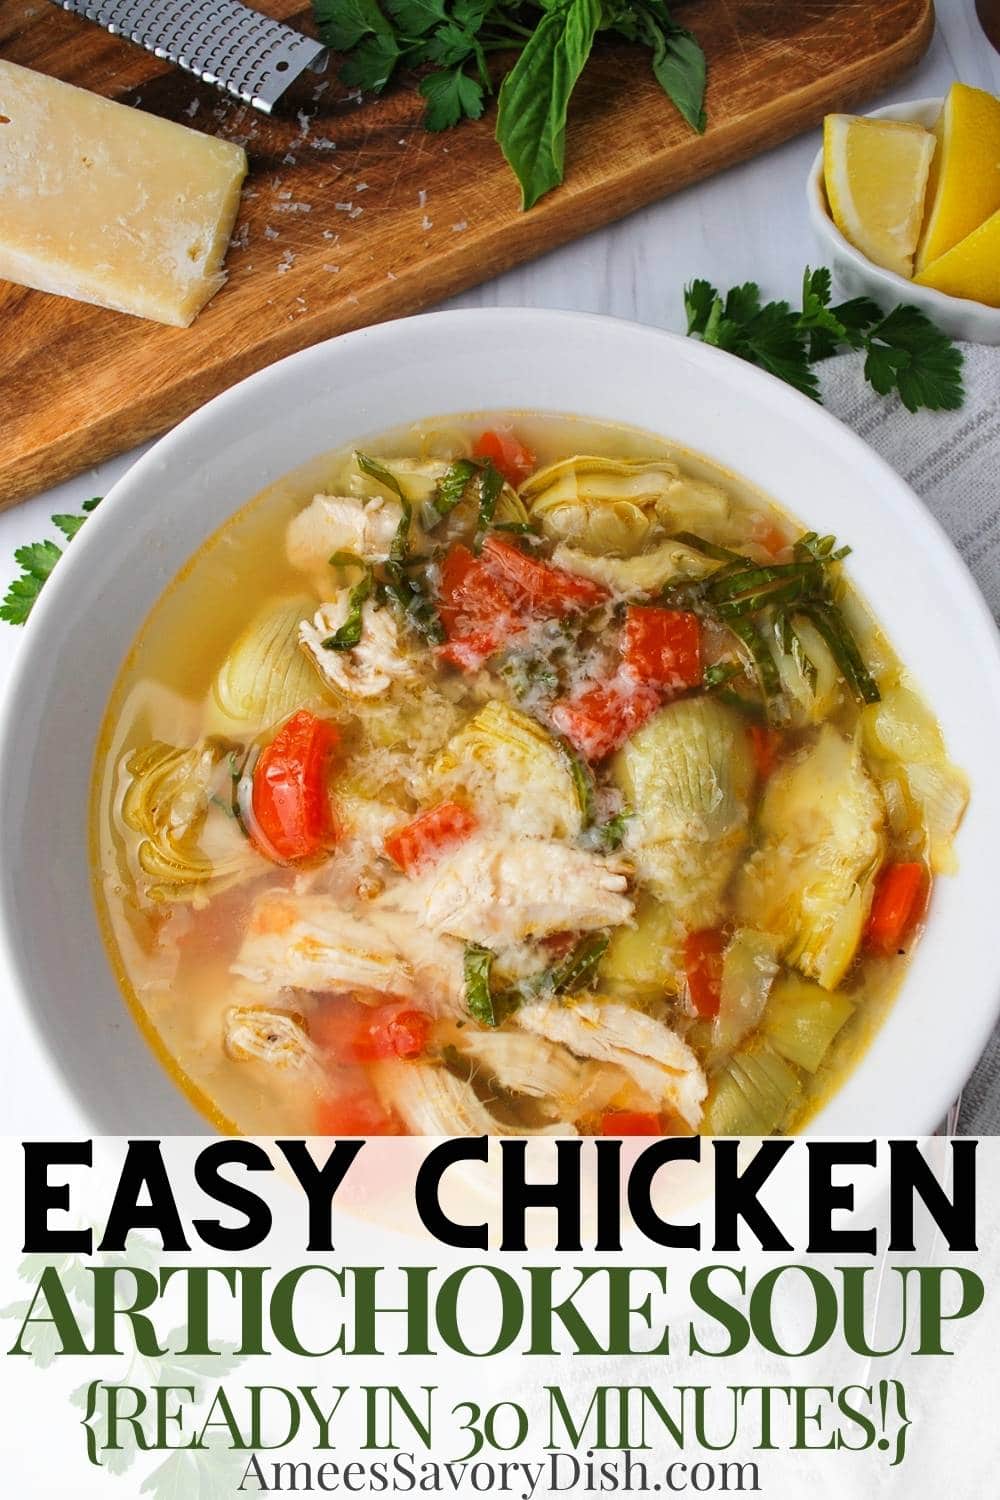 This quick and easy broth-based chicken artichoke soup is delicious, high protein, and ready in 30 minutes or less! via @Ameessavorydish